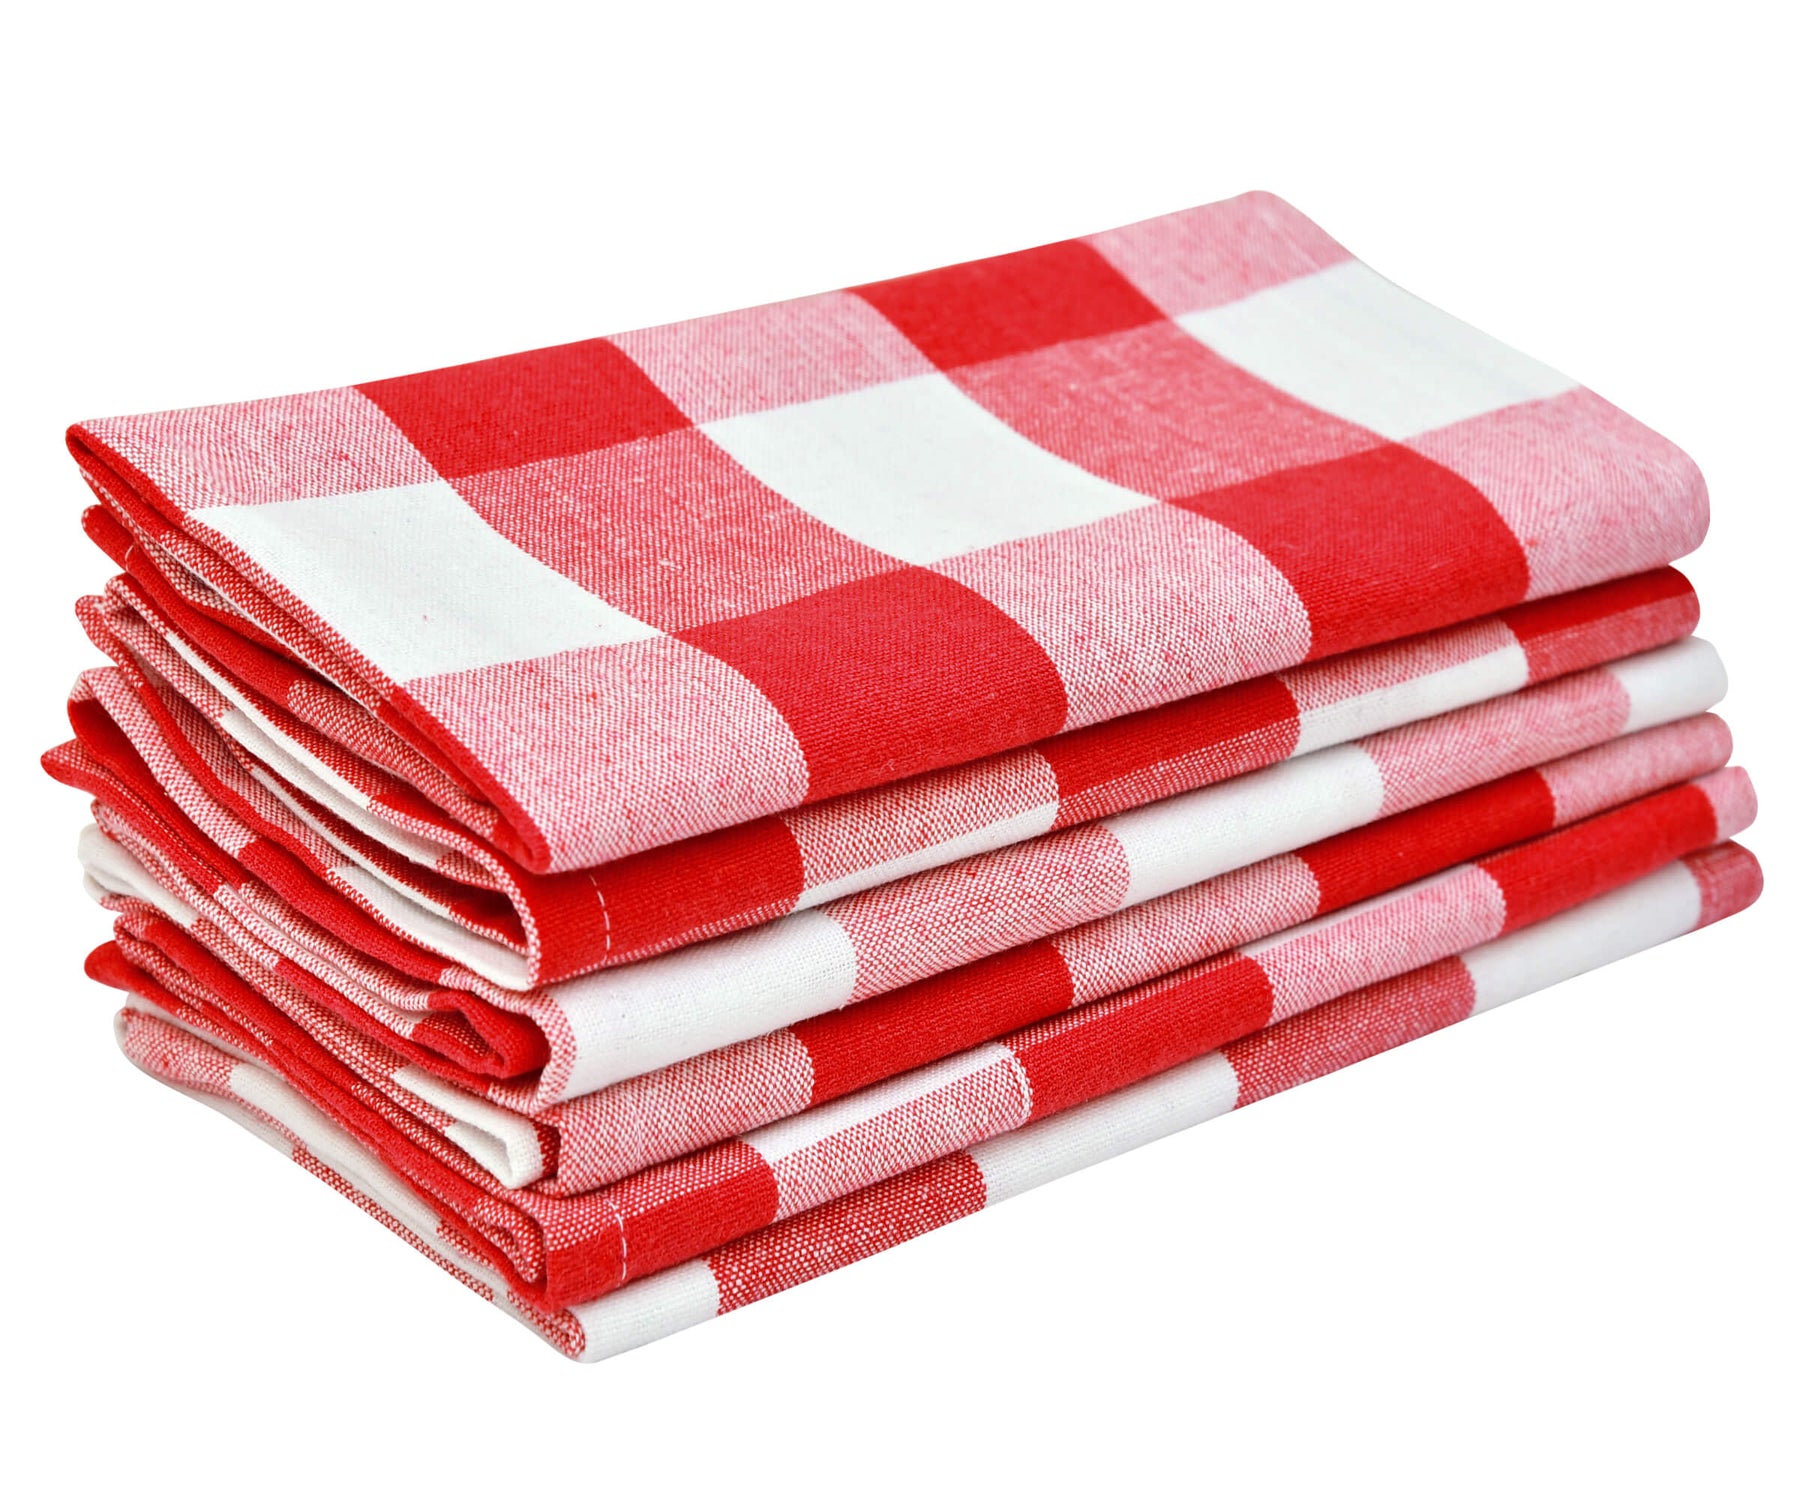 Enrich your table setting with vibrant red and white napkins, infusing charm and color into every meal.